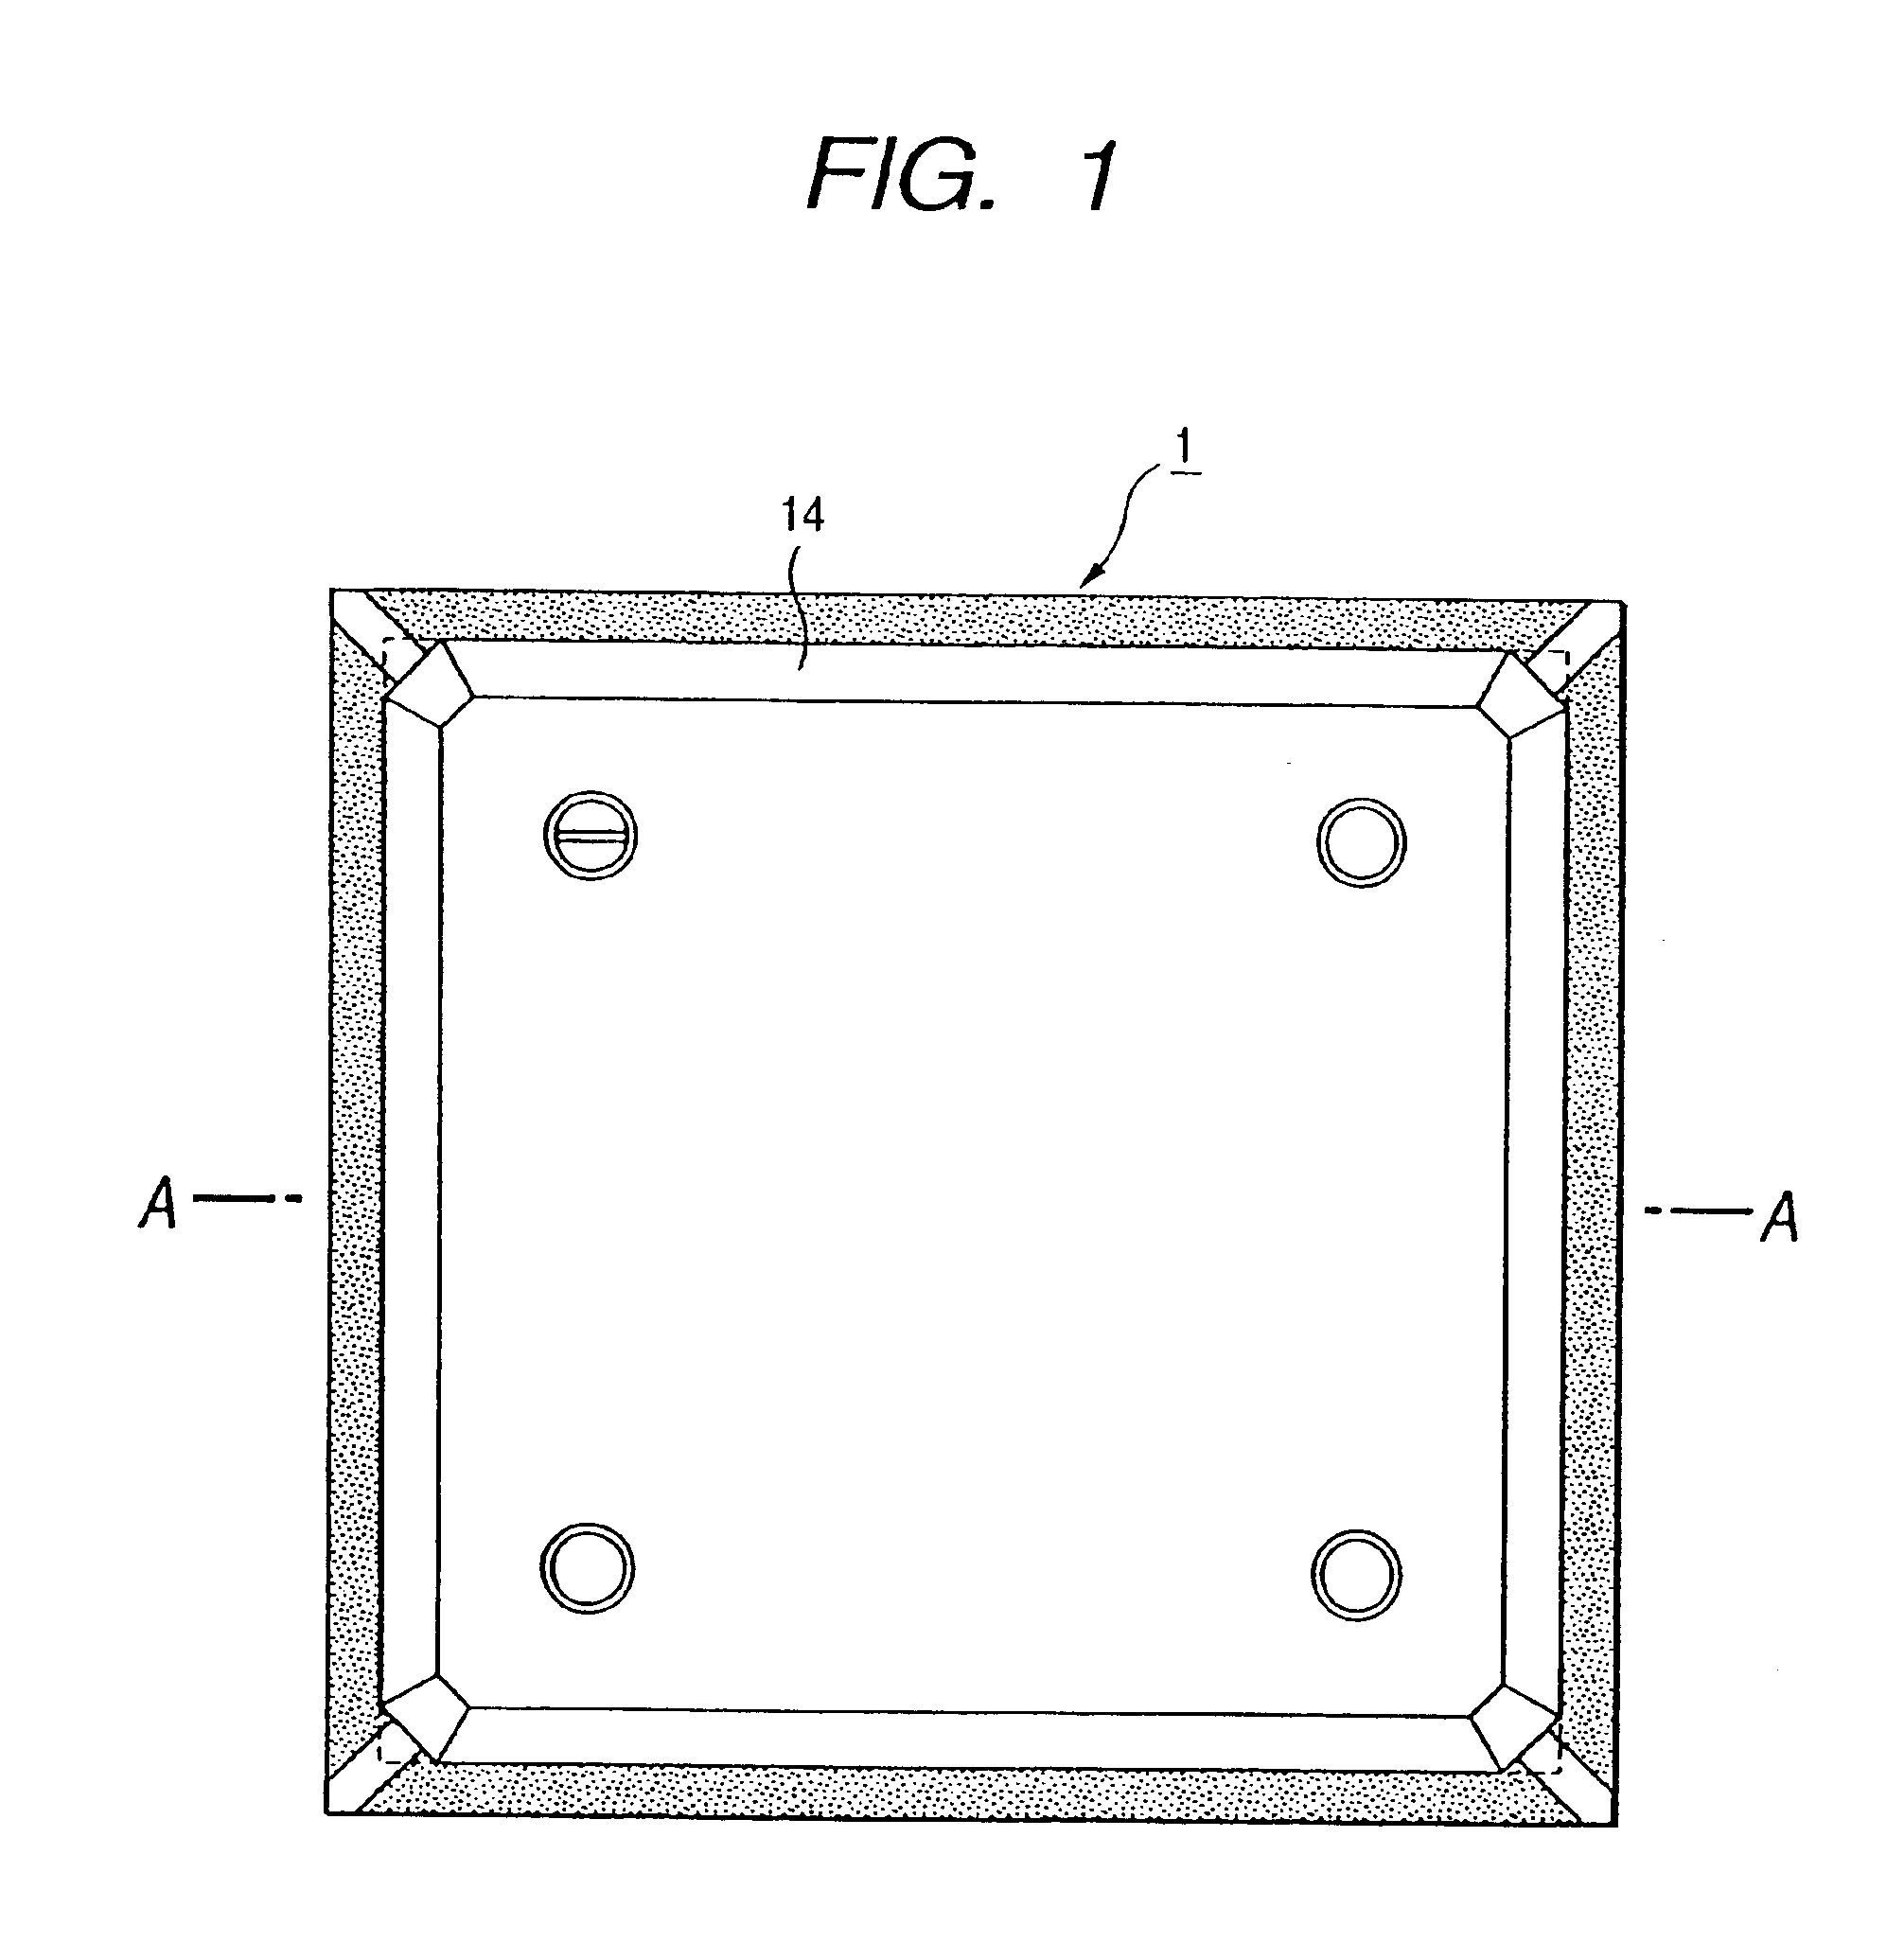 Method of manufacturing semiconductor package including forming a resin sealing member